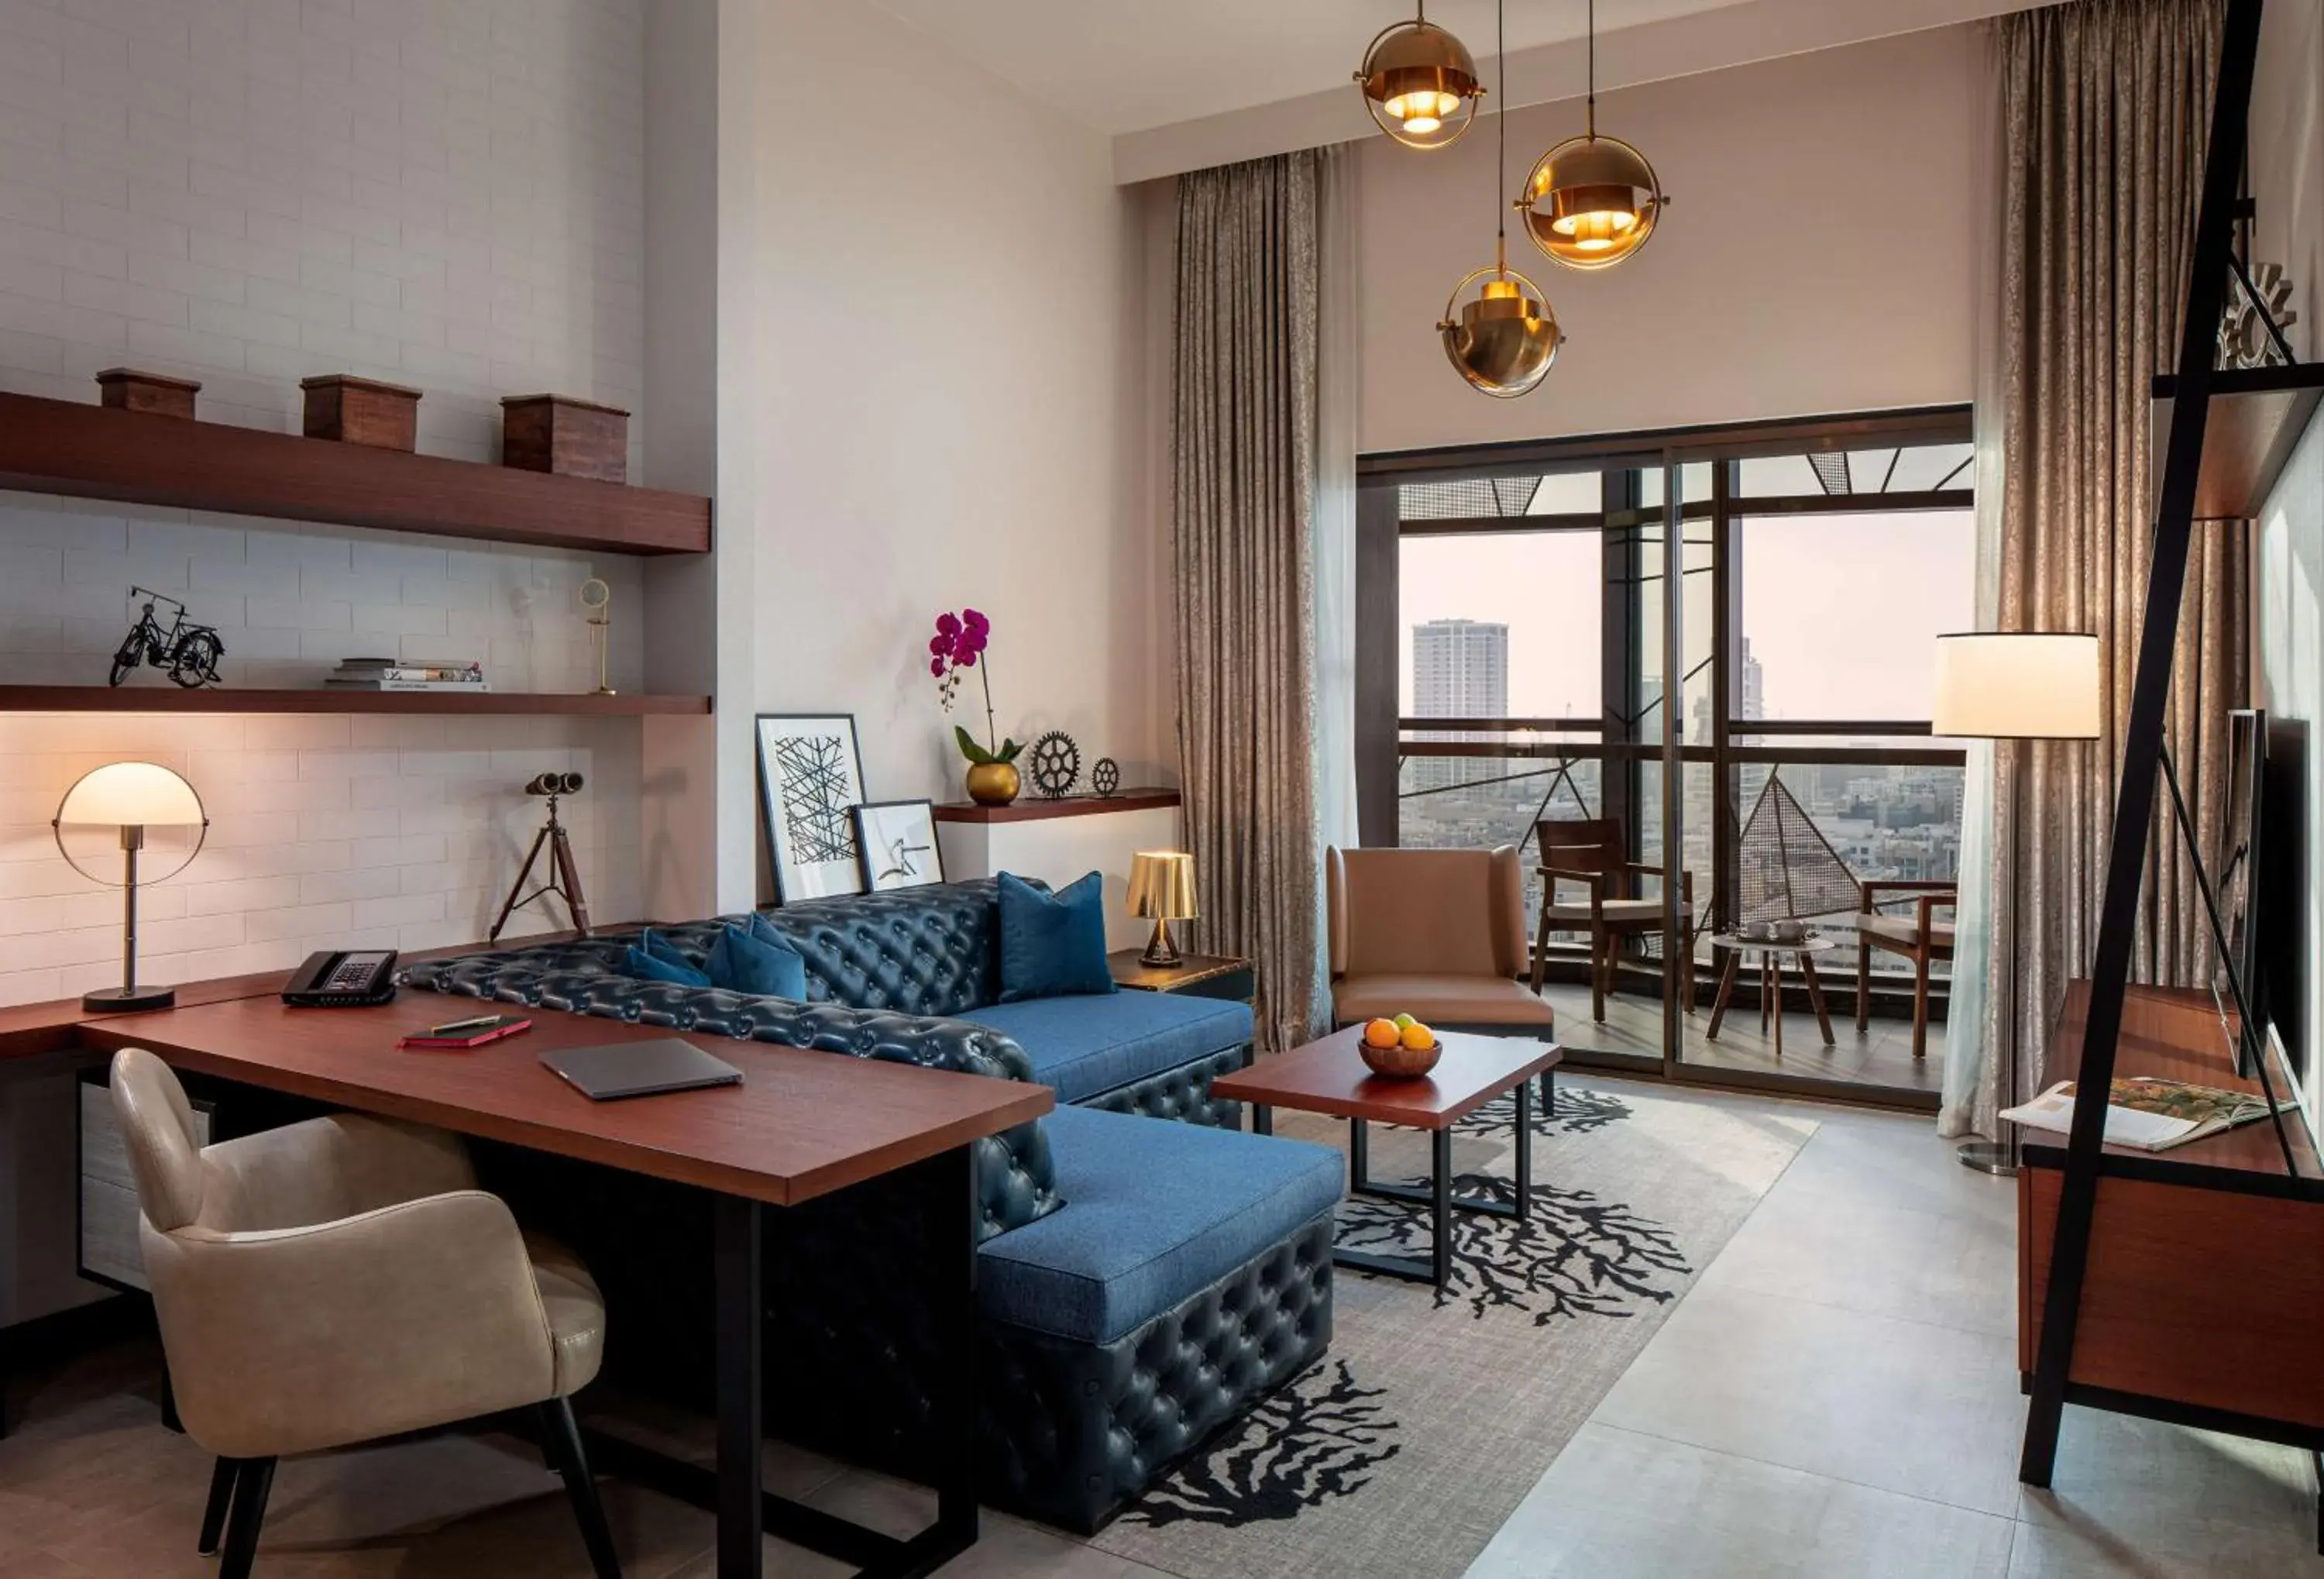 Bedroom, Dining Area in DoubleTree by Hilton Dubai M Square Hotel & Residences